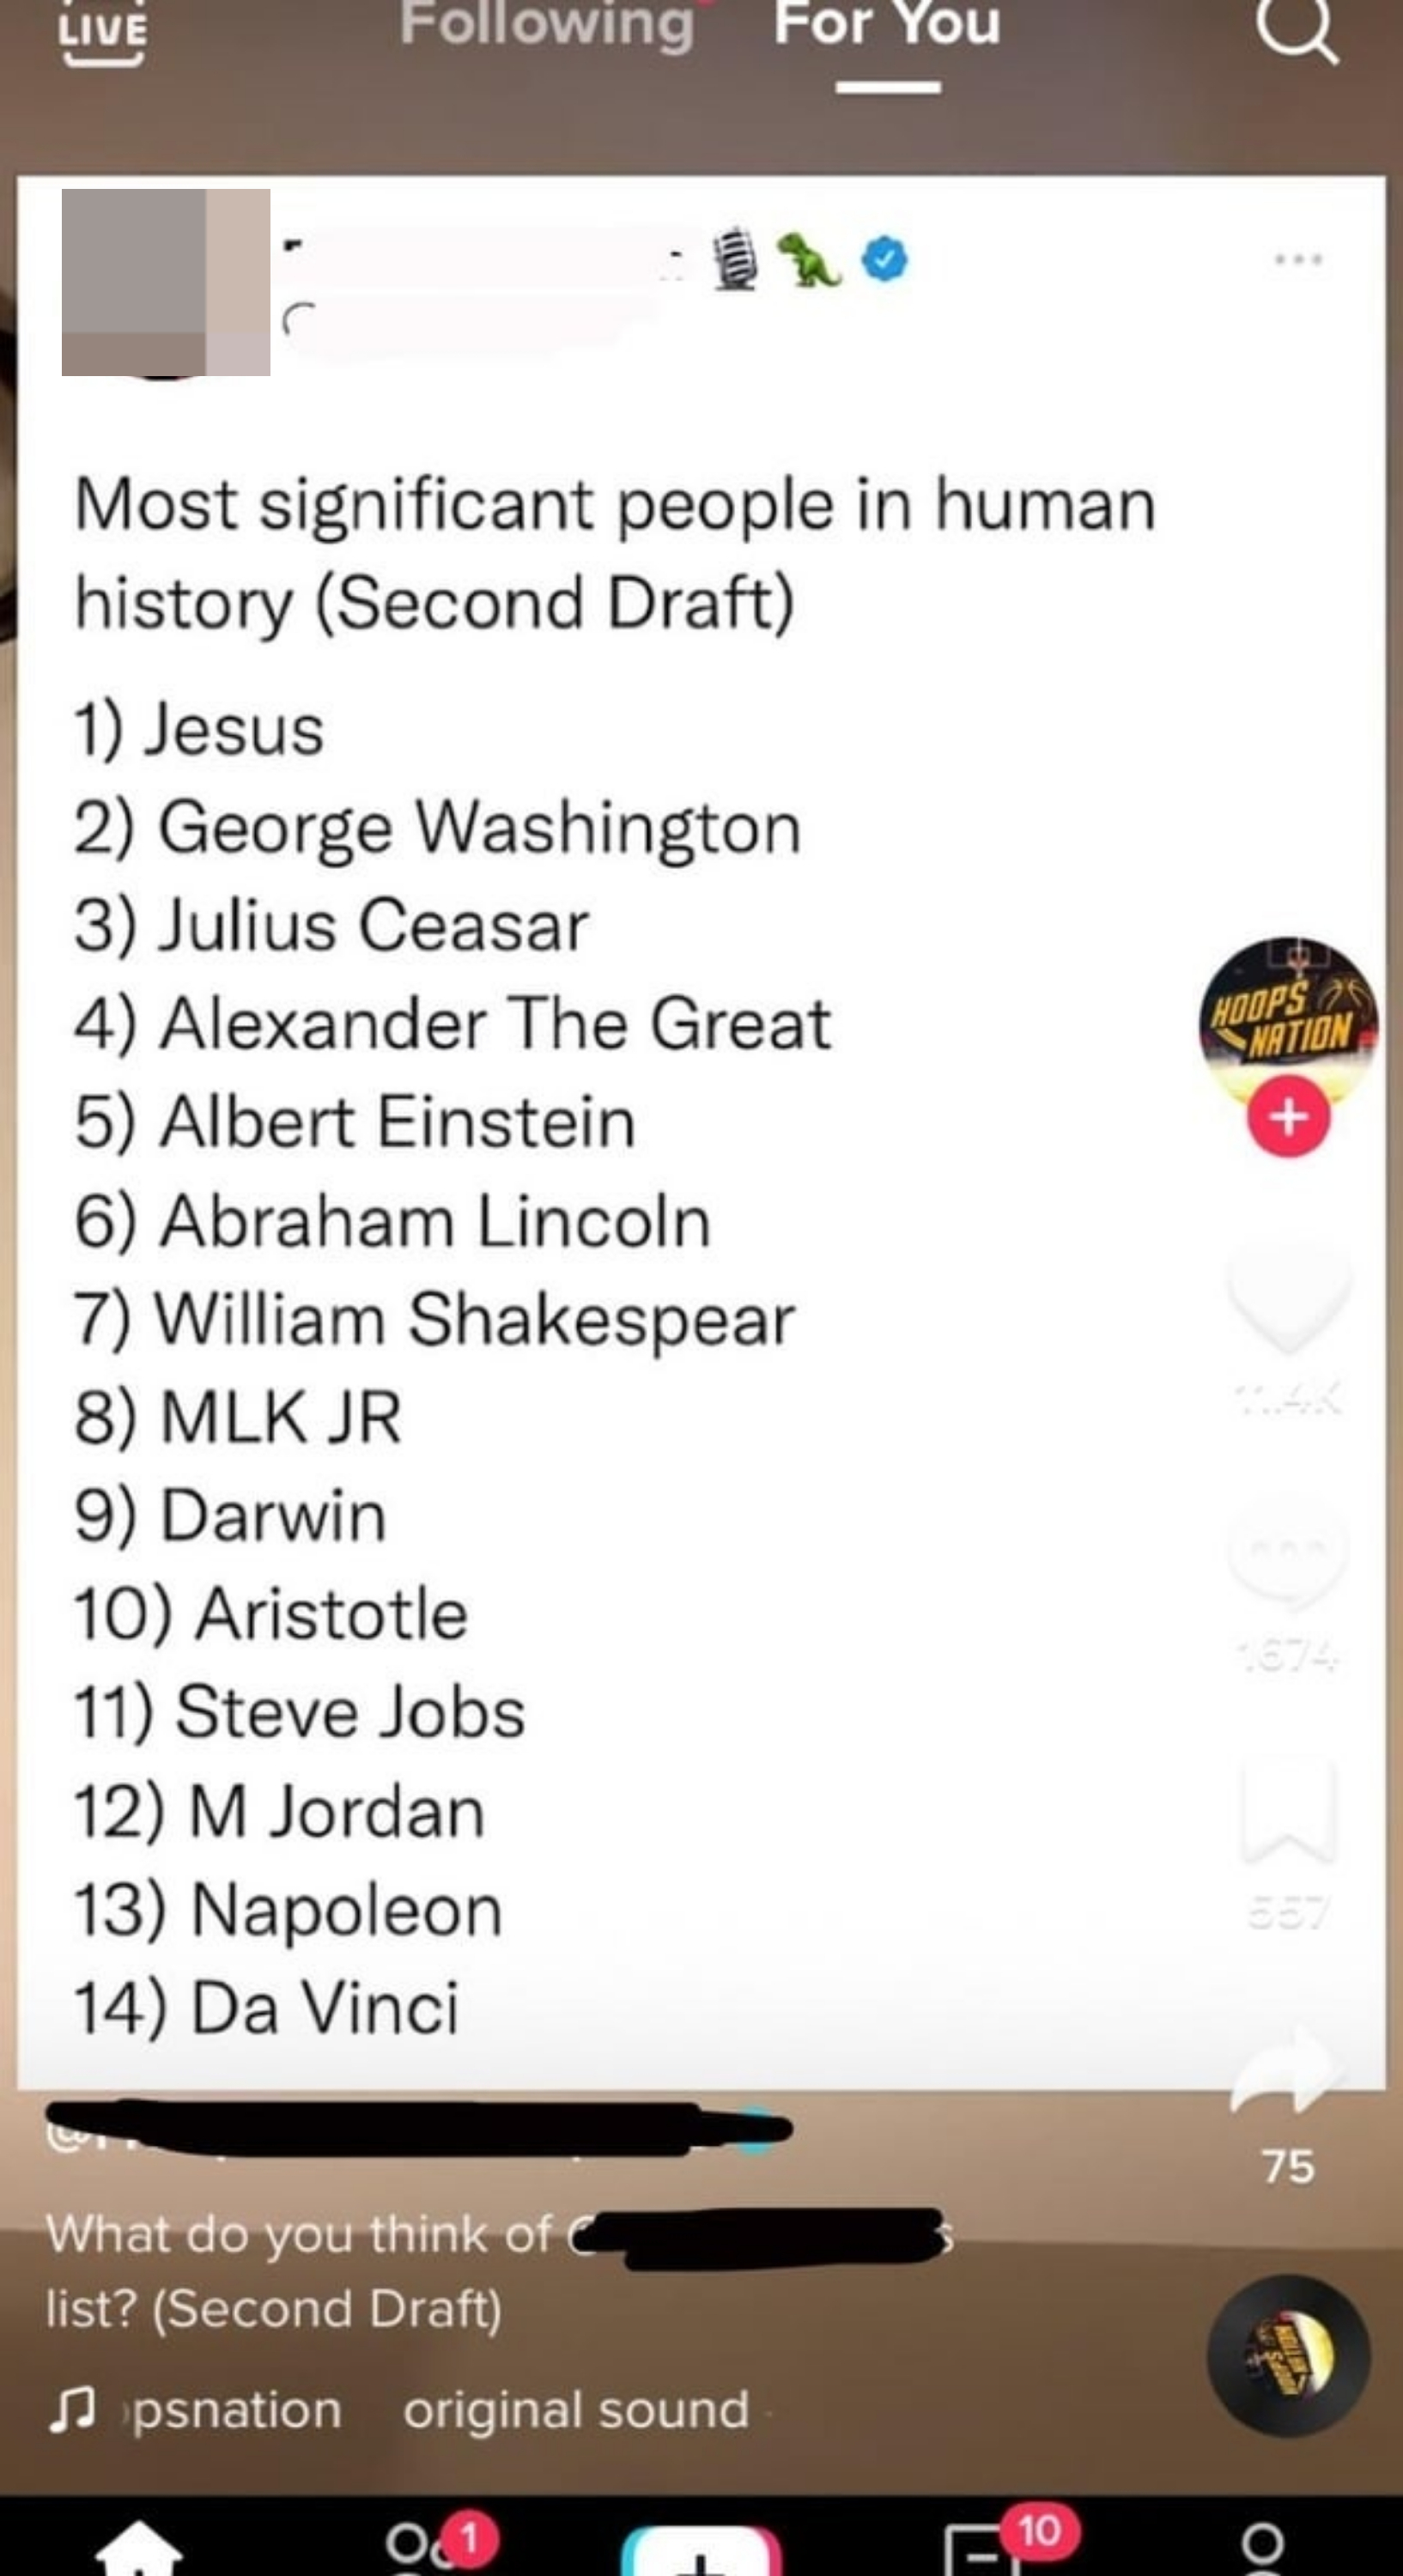 An American made a list of the most significant people in human history, with Jesus first, George Washington second, Michael Jordan 12th, and Napoleon 13th